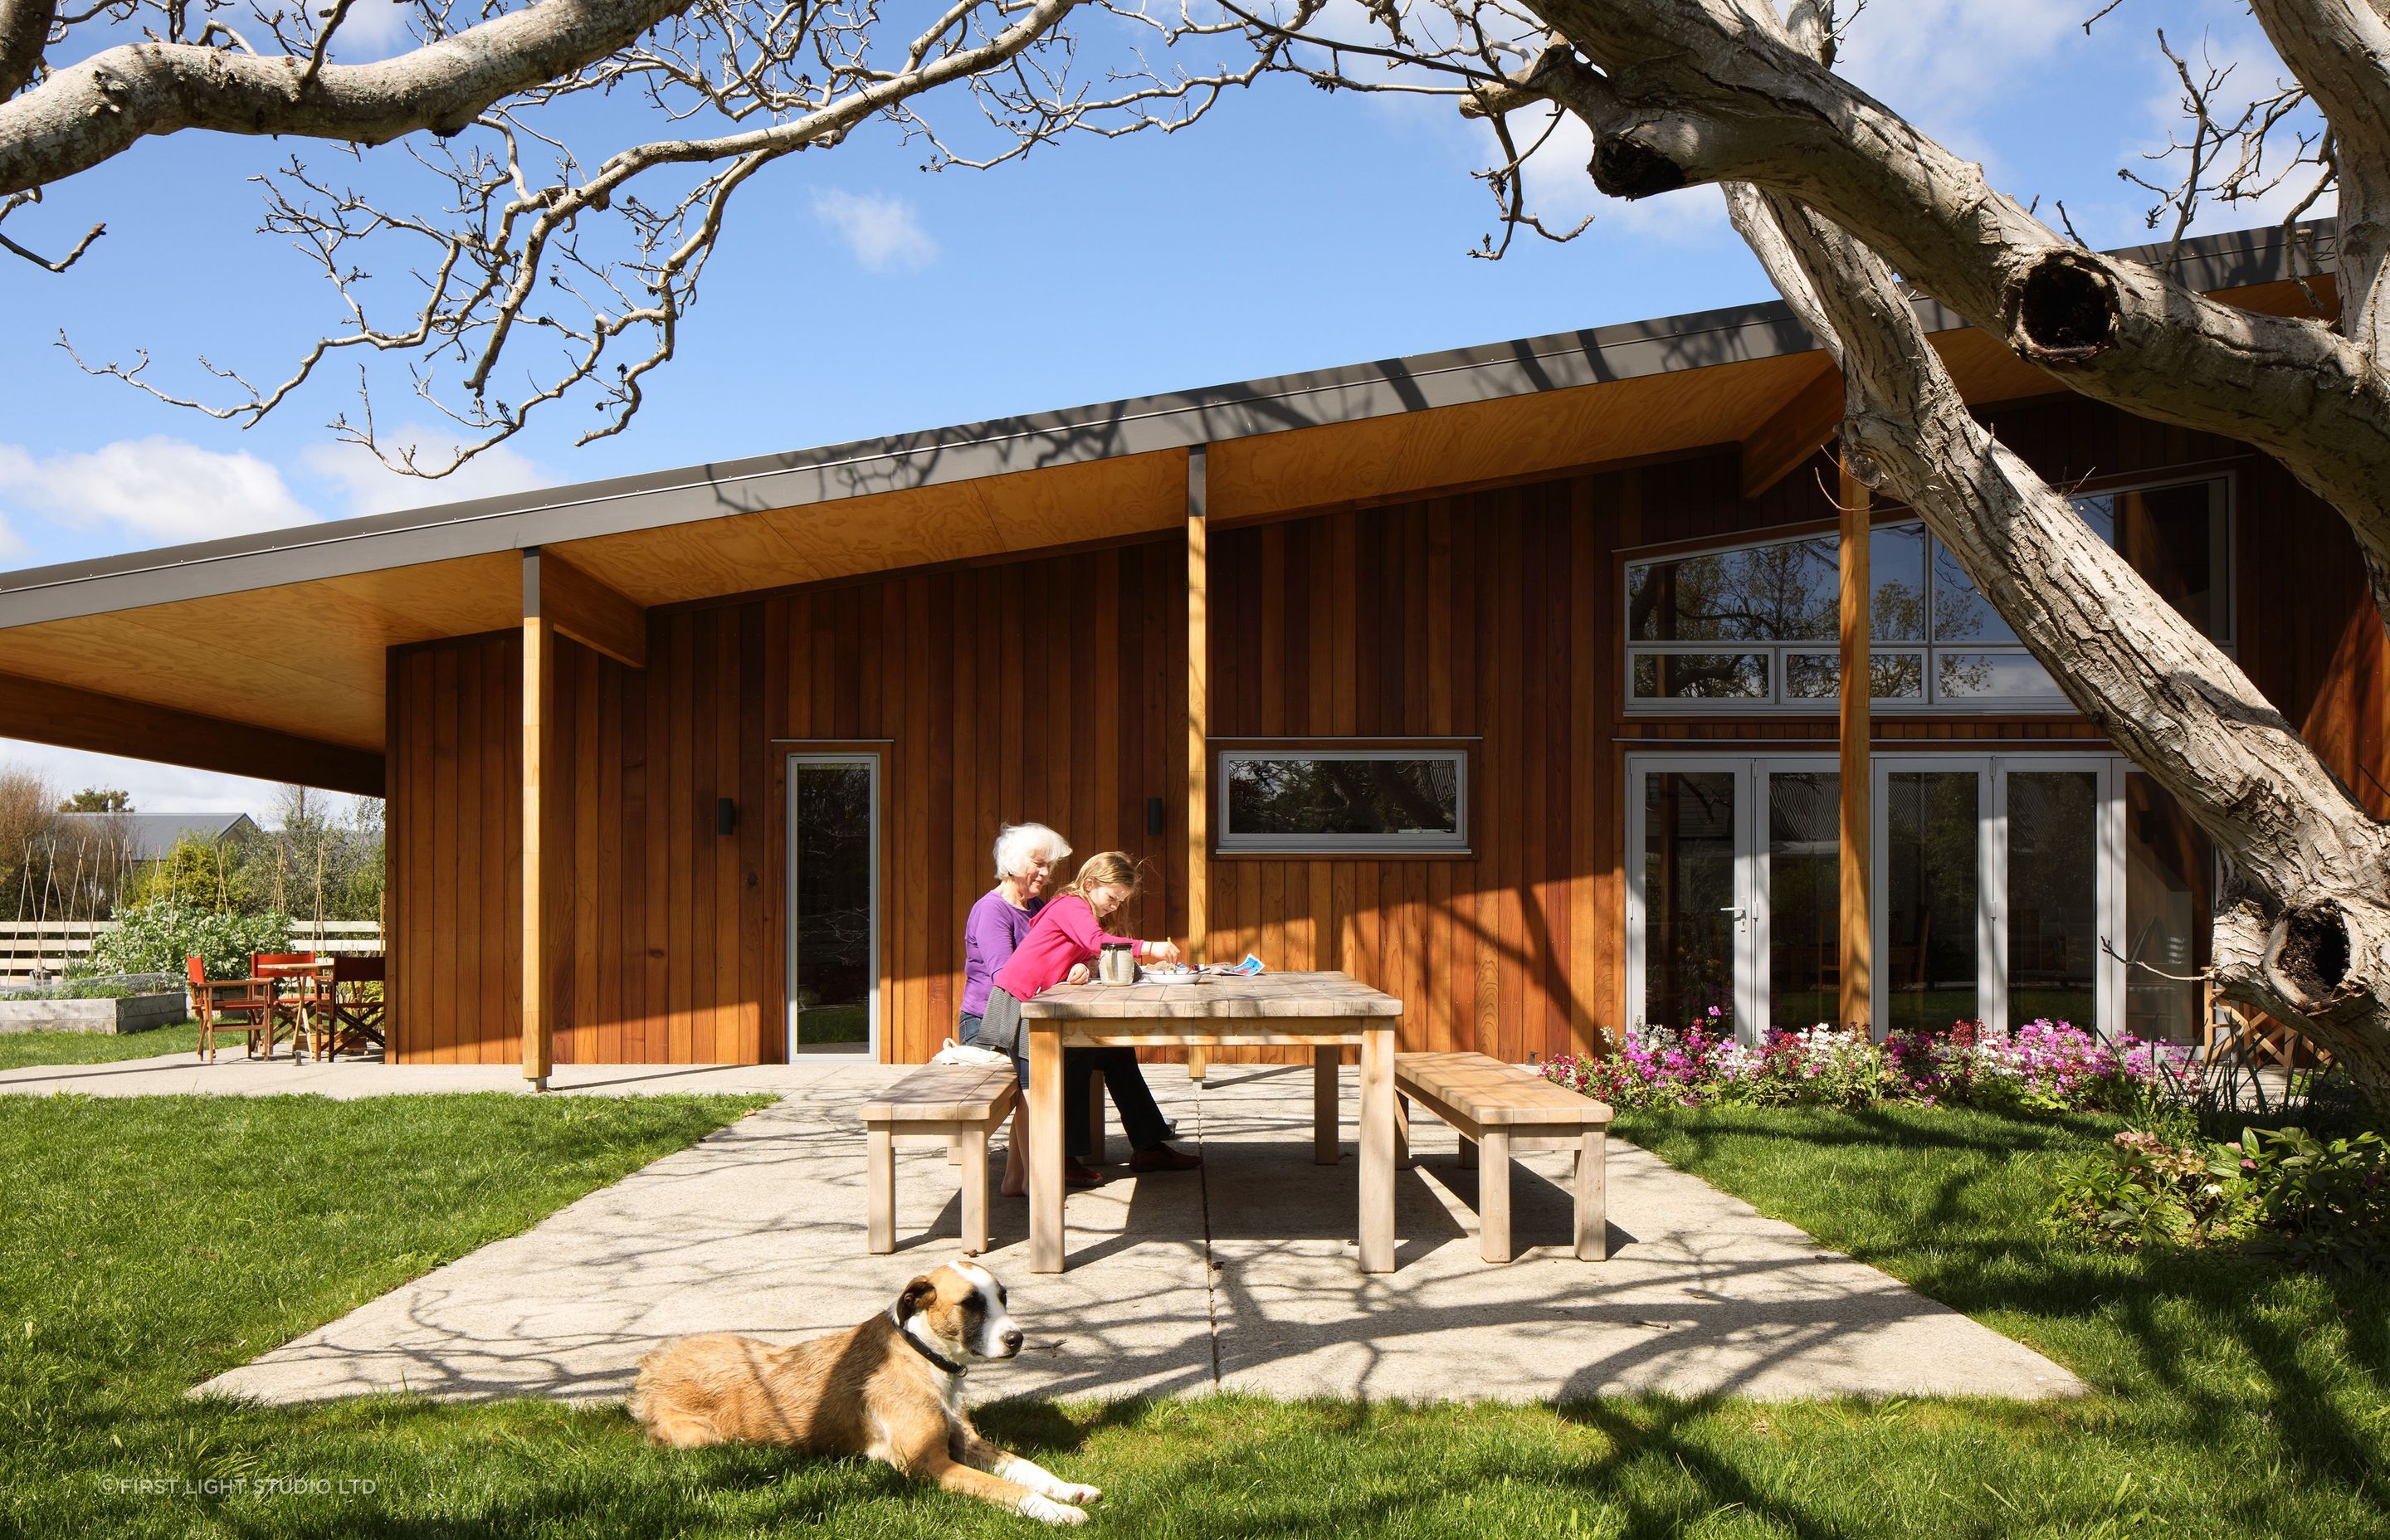 Timber cladding complements the home's beautiful surroundings.